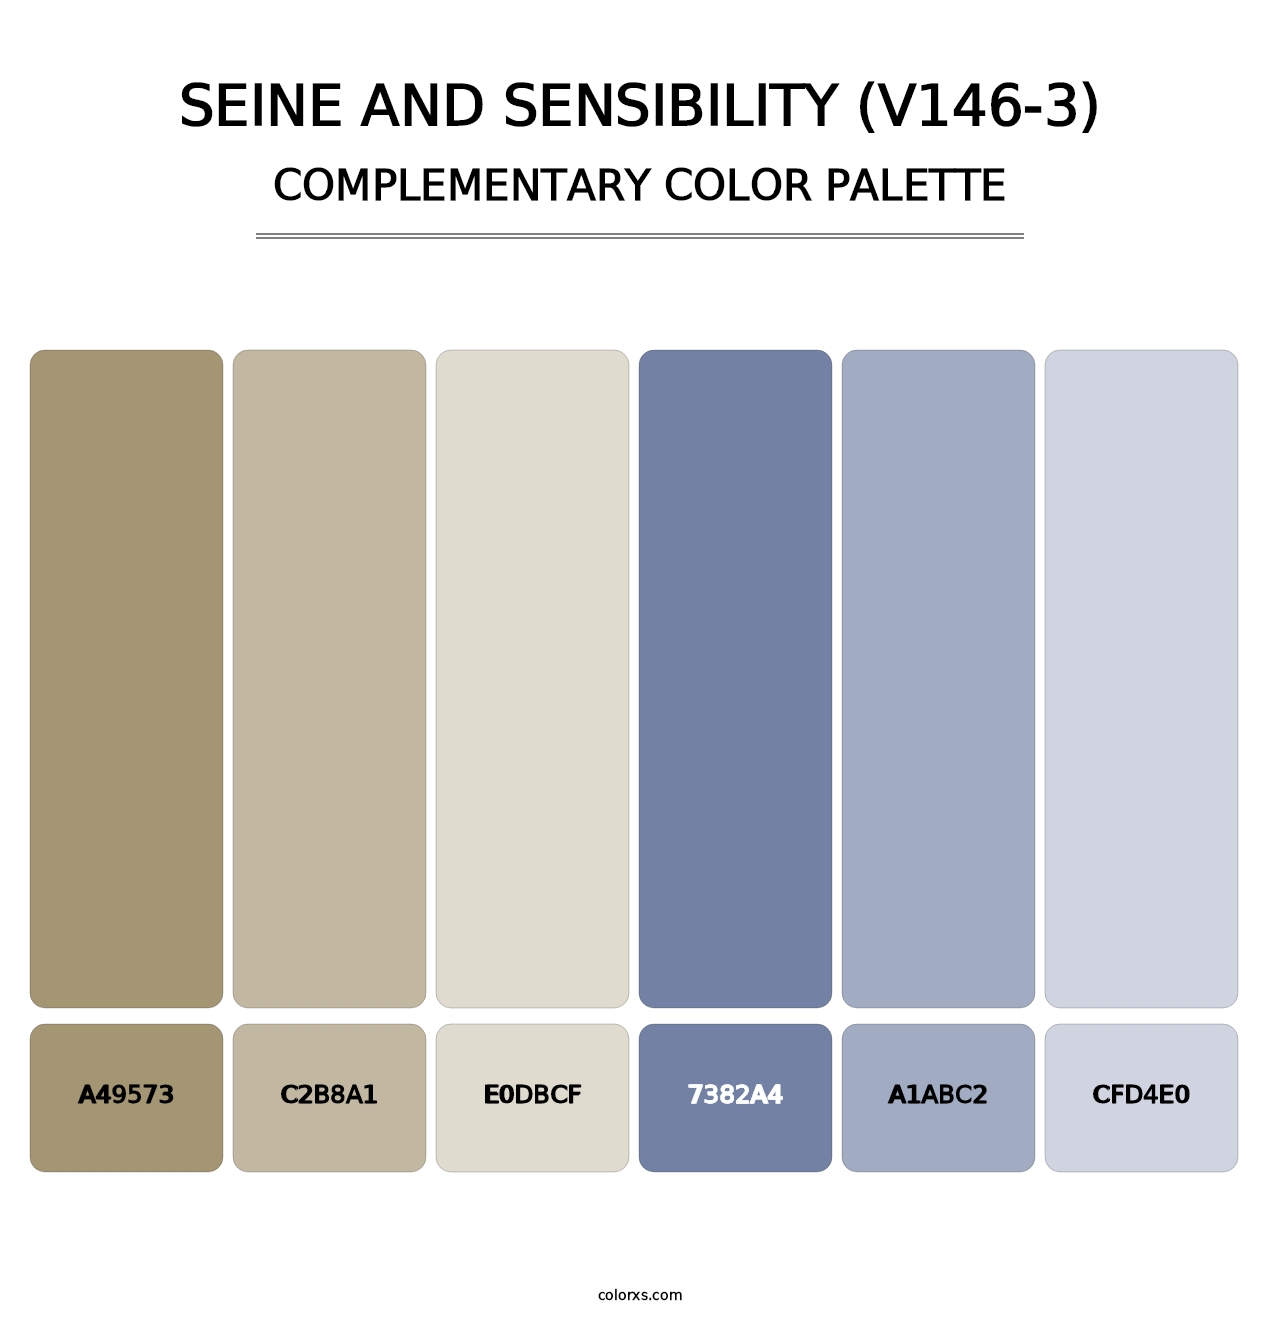 Seine and Sensibility (V146-3) - Complementary Color Palette